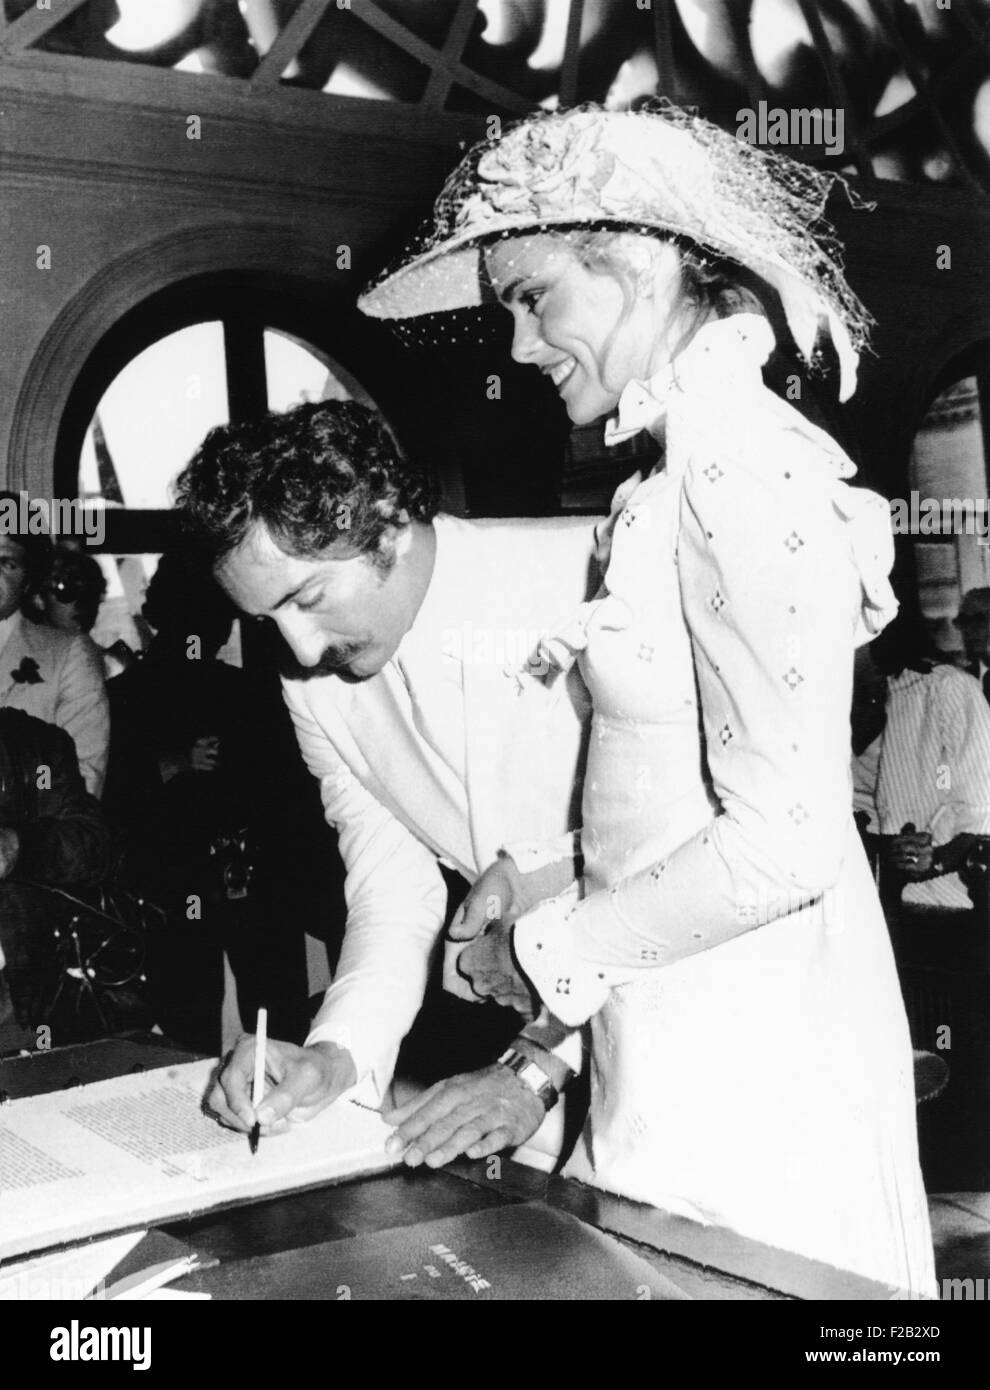 Newly wed Errol Whitson, signs the marriage registry after marrying model Margot Hemingway. They were married at the municipal building of the First Arrondissement in Paris. They divorced in 1978. (CSU 2015 7 308) Stock Photo